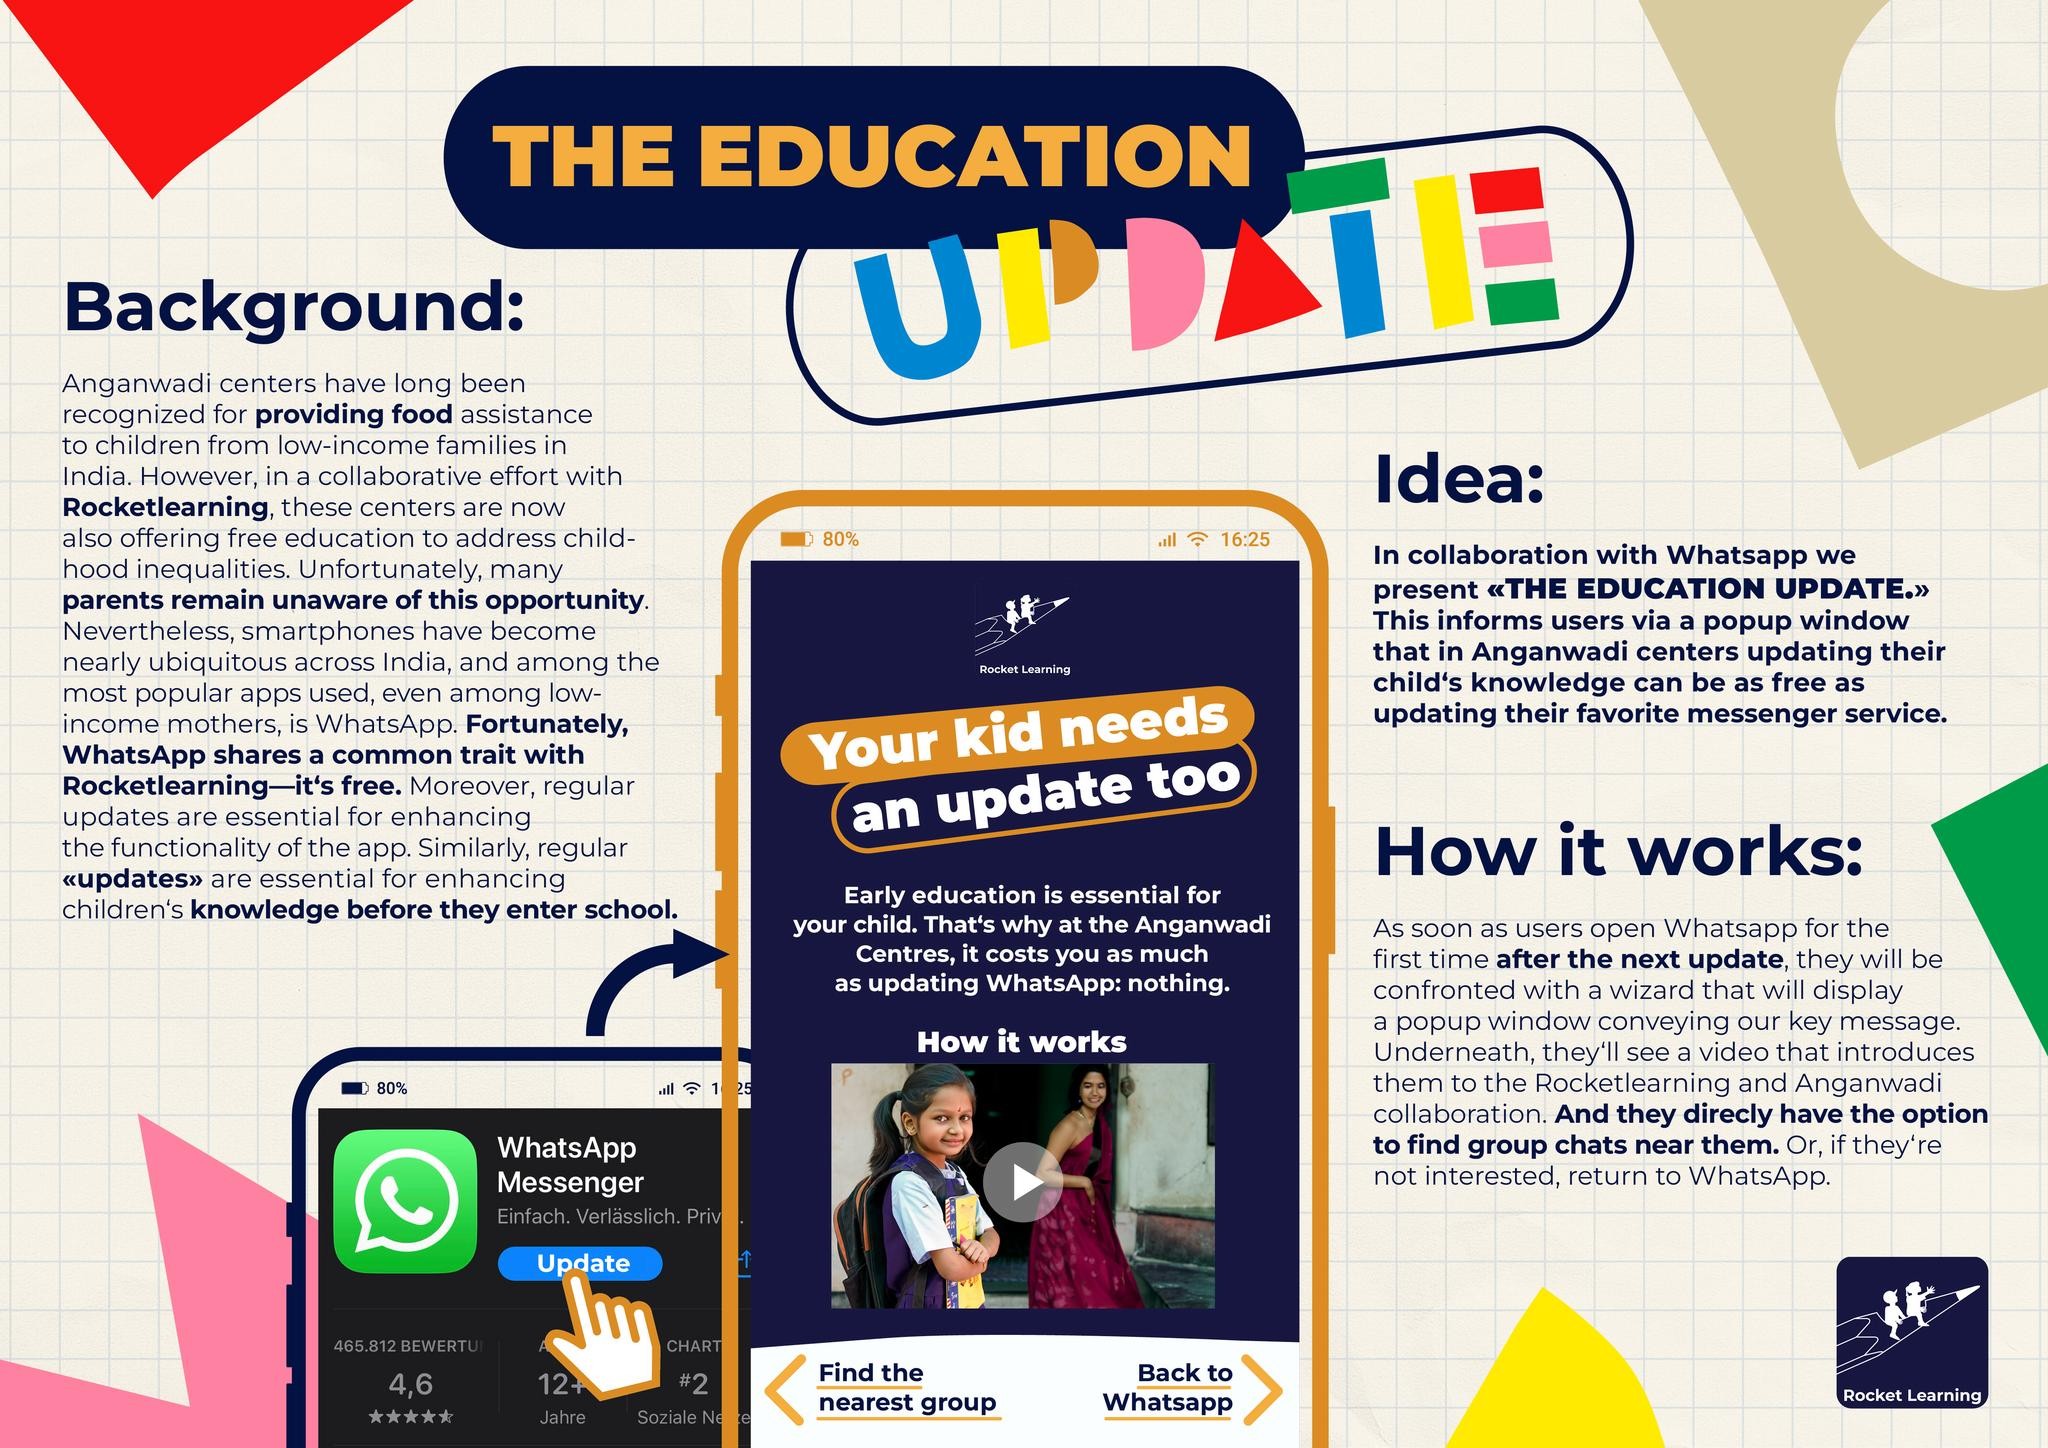 The education update